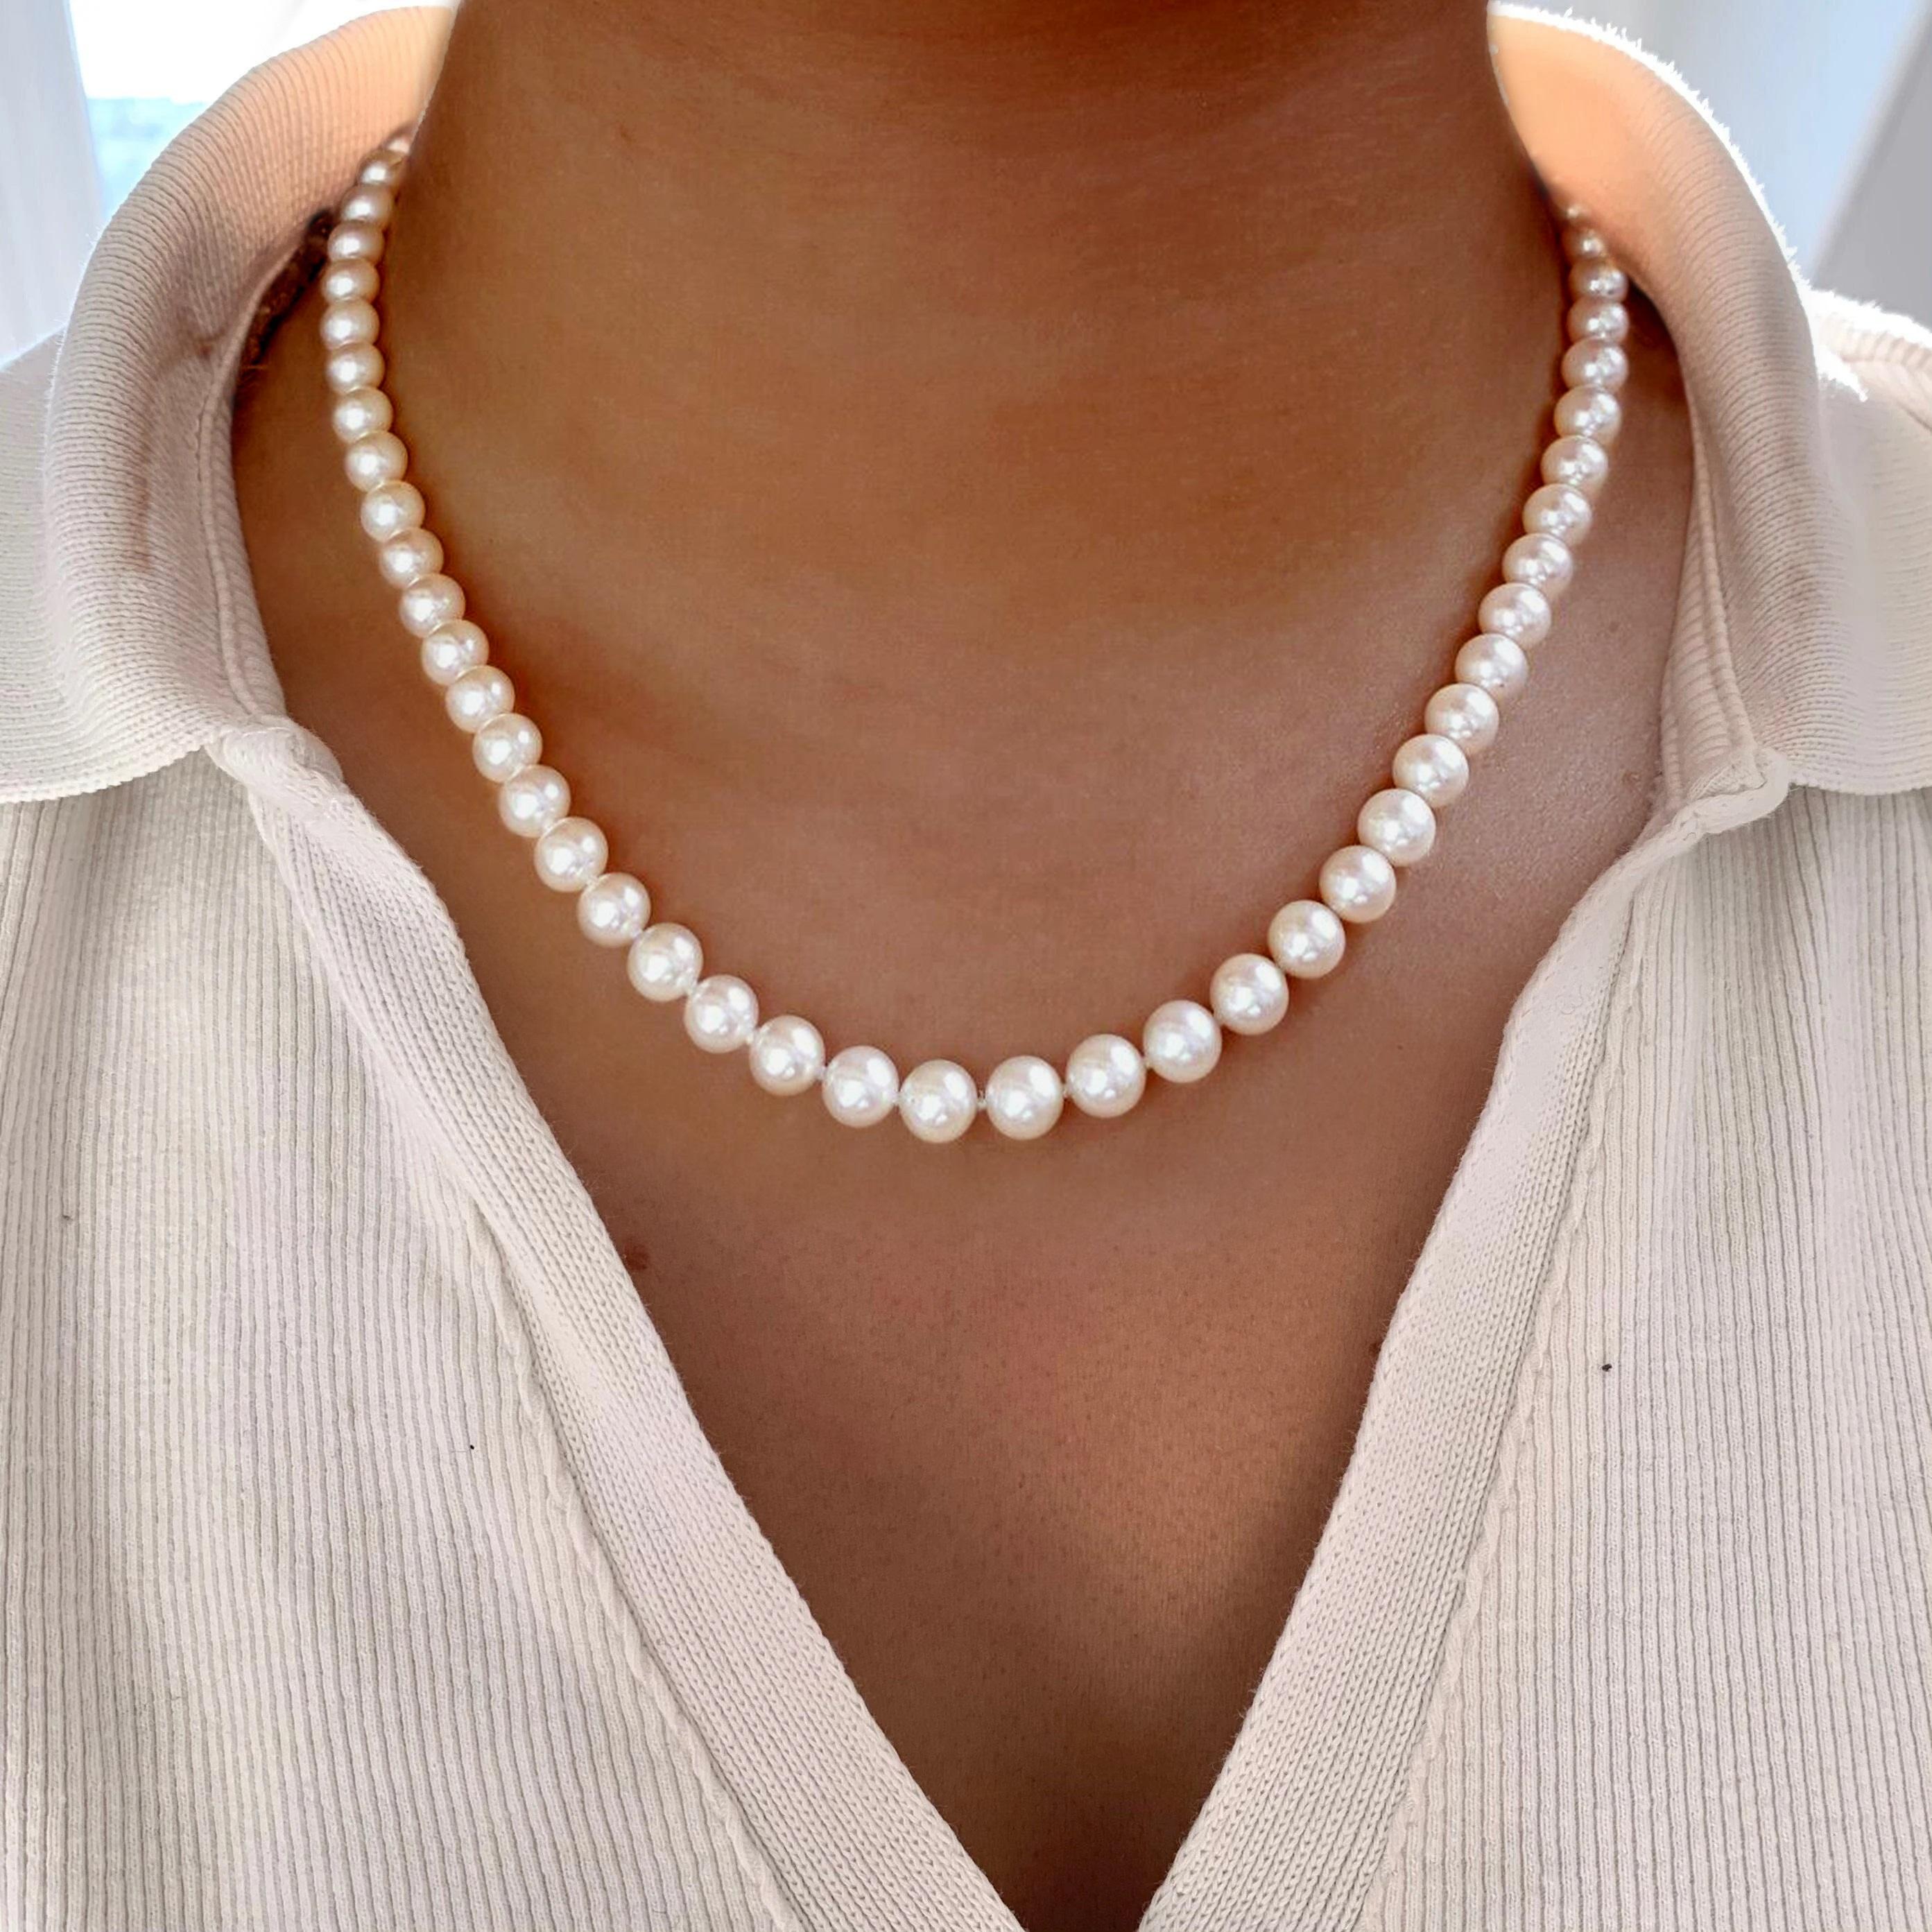 Mikimoto 18K Yellow Gold 5.5-6 mm Akoya Pearl Strand Necklace. 

The Necklace weighs 19 grams, measuring 16